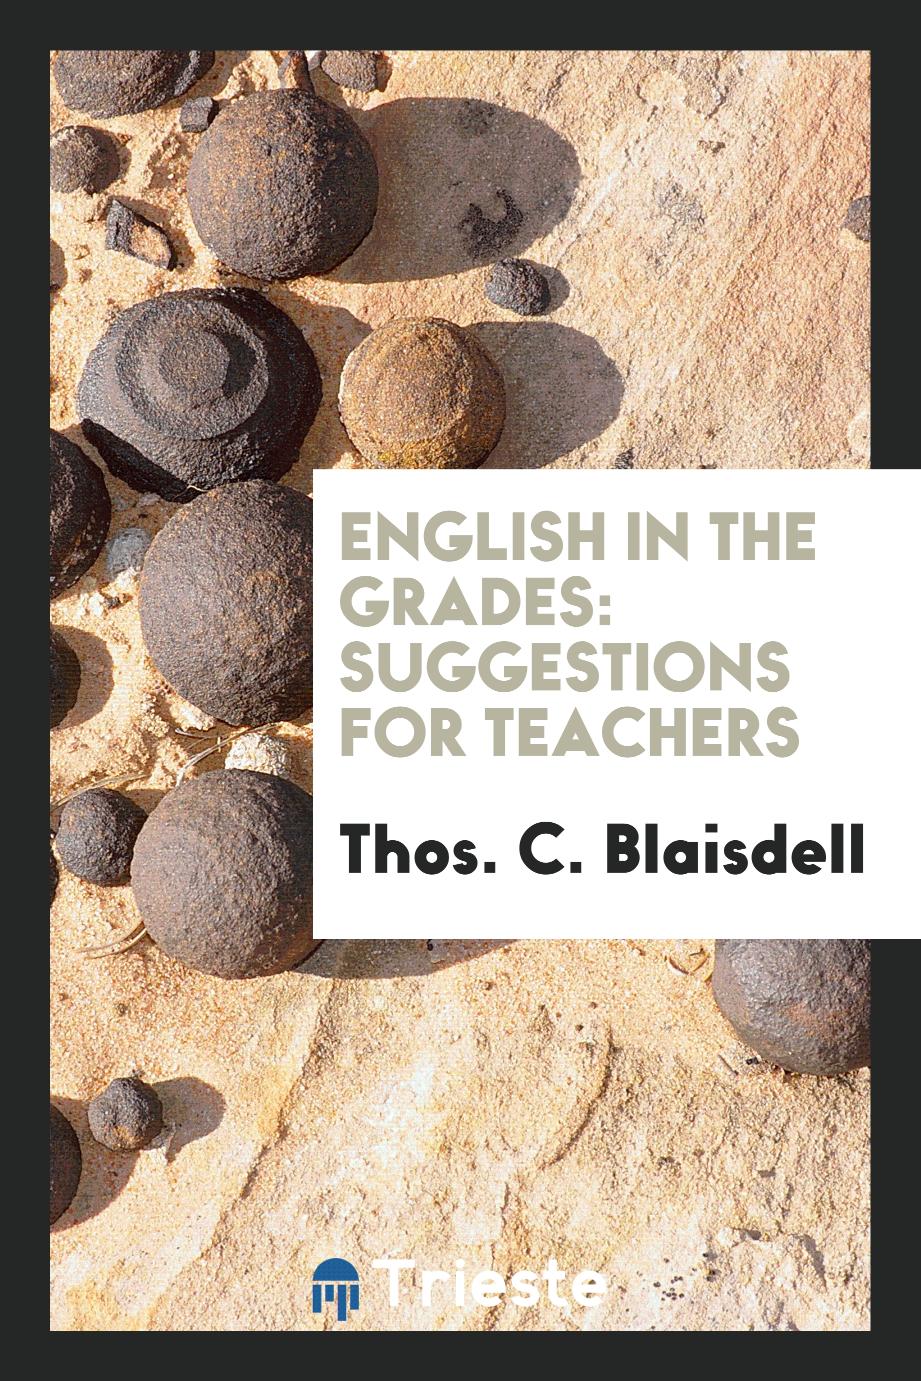 English in the Grades: Suggestions for Teachers